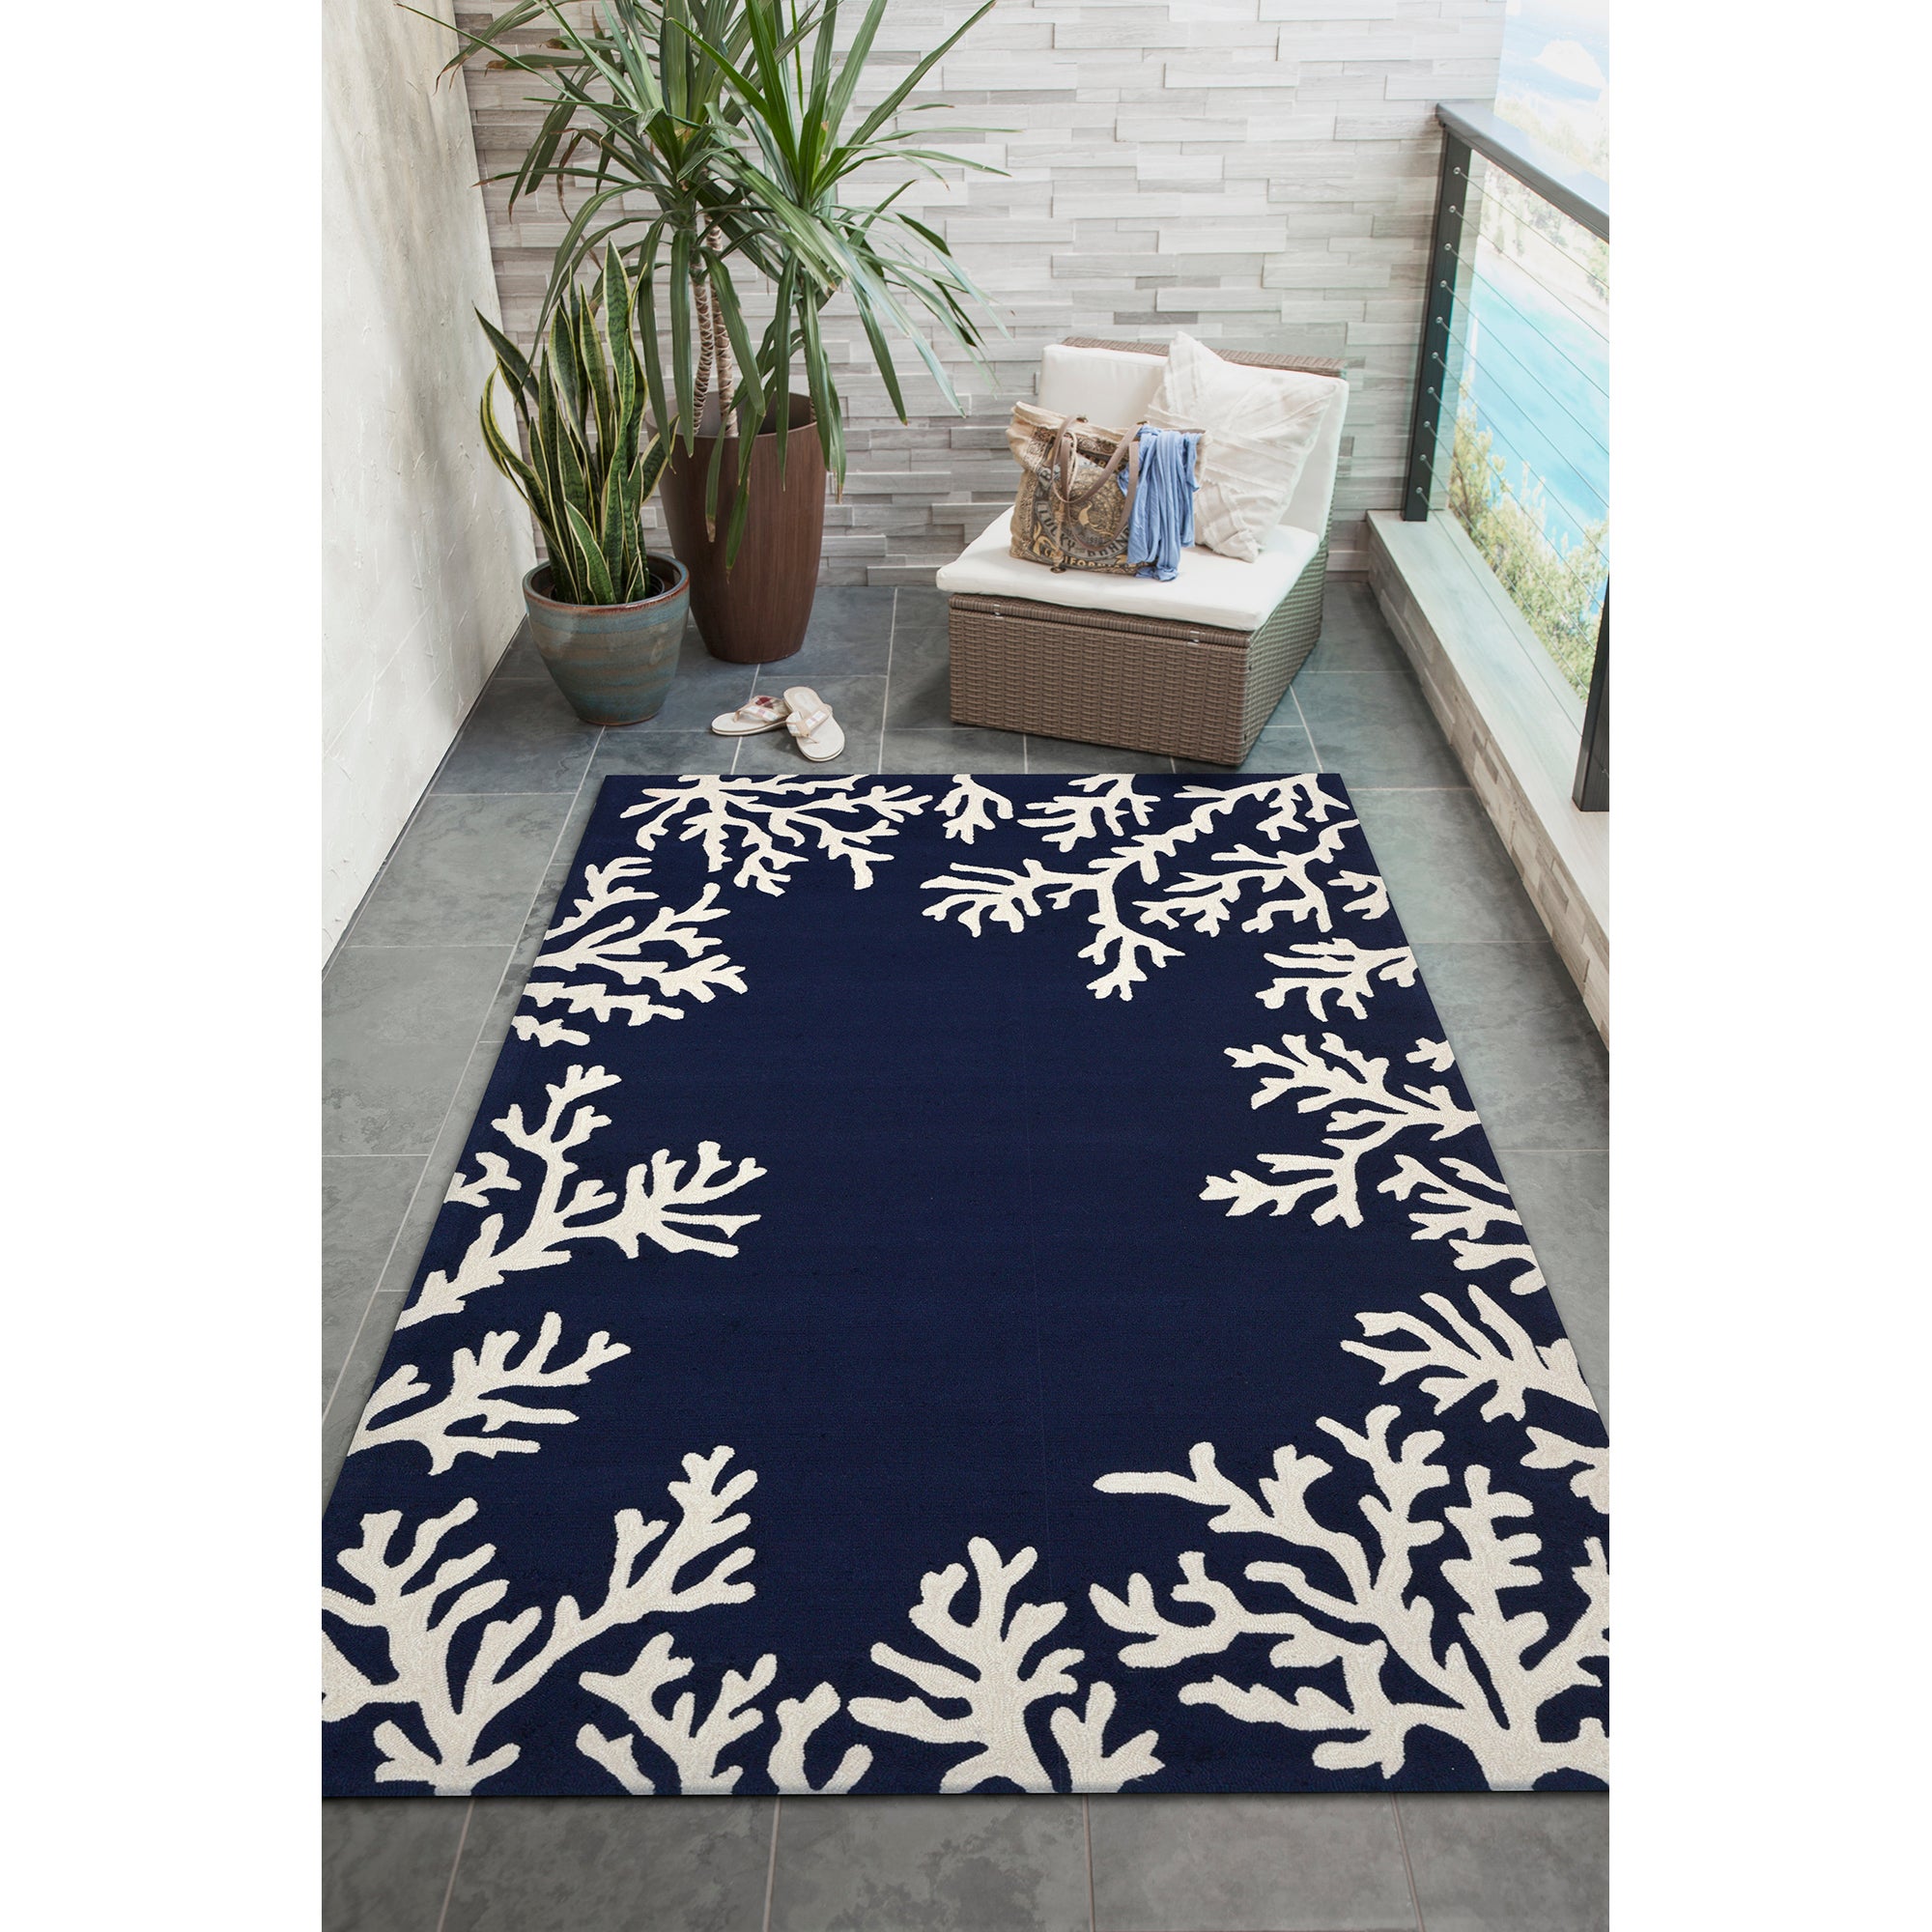 Liora Manne CAPR5162033 Capri Shell Coral Reef Border Coastal Ocean Indoor/Outdoor Beach Large Area Rug Navy and White 76 X 96 